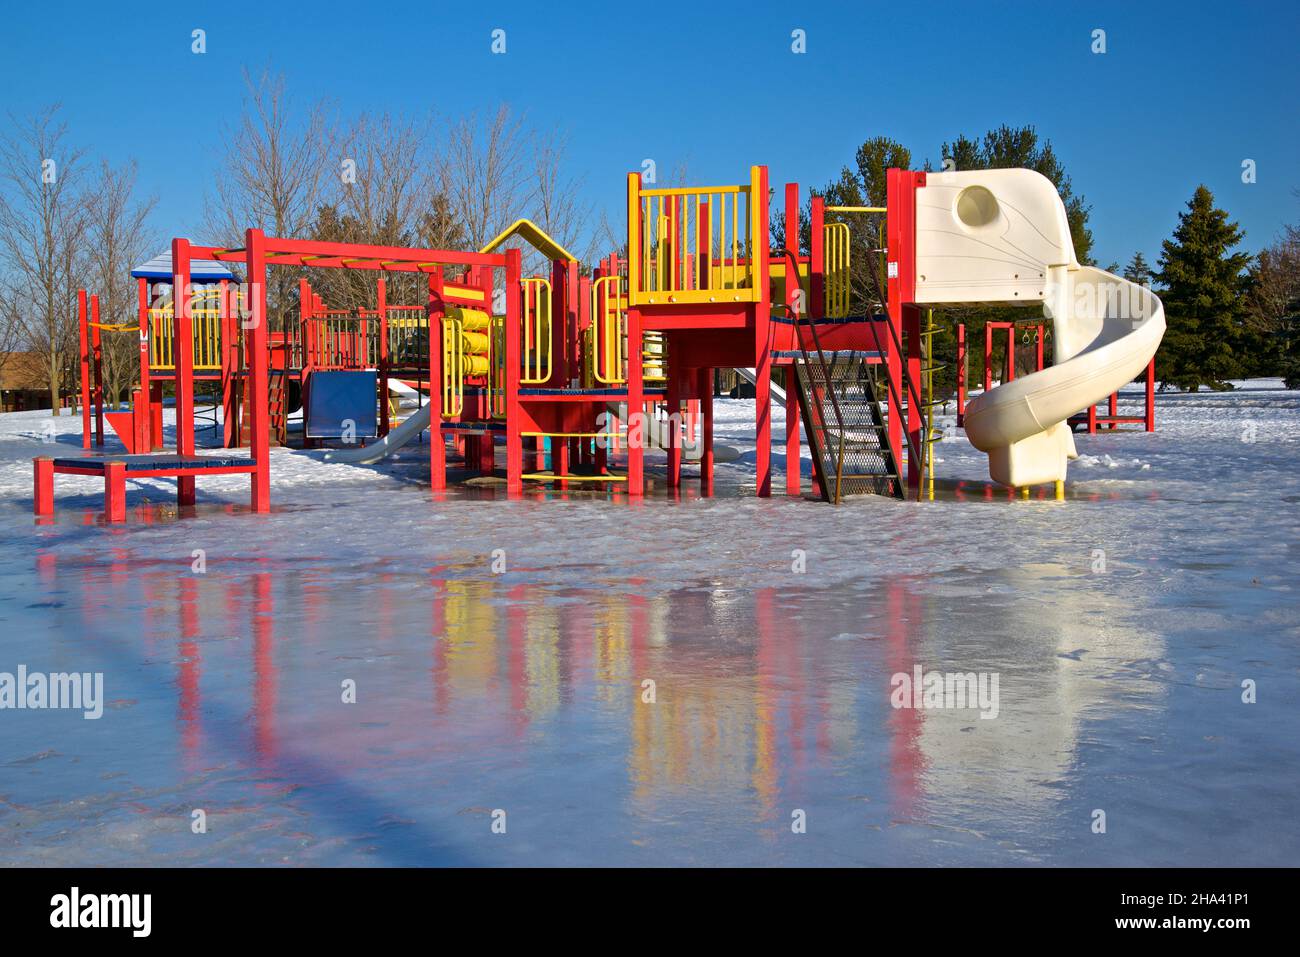 Reflection of the slide in the playground at the public park in winter Stock Photo